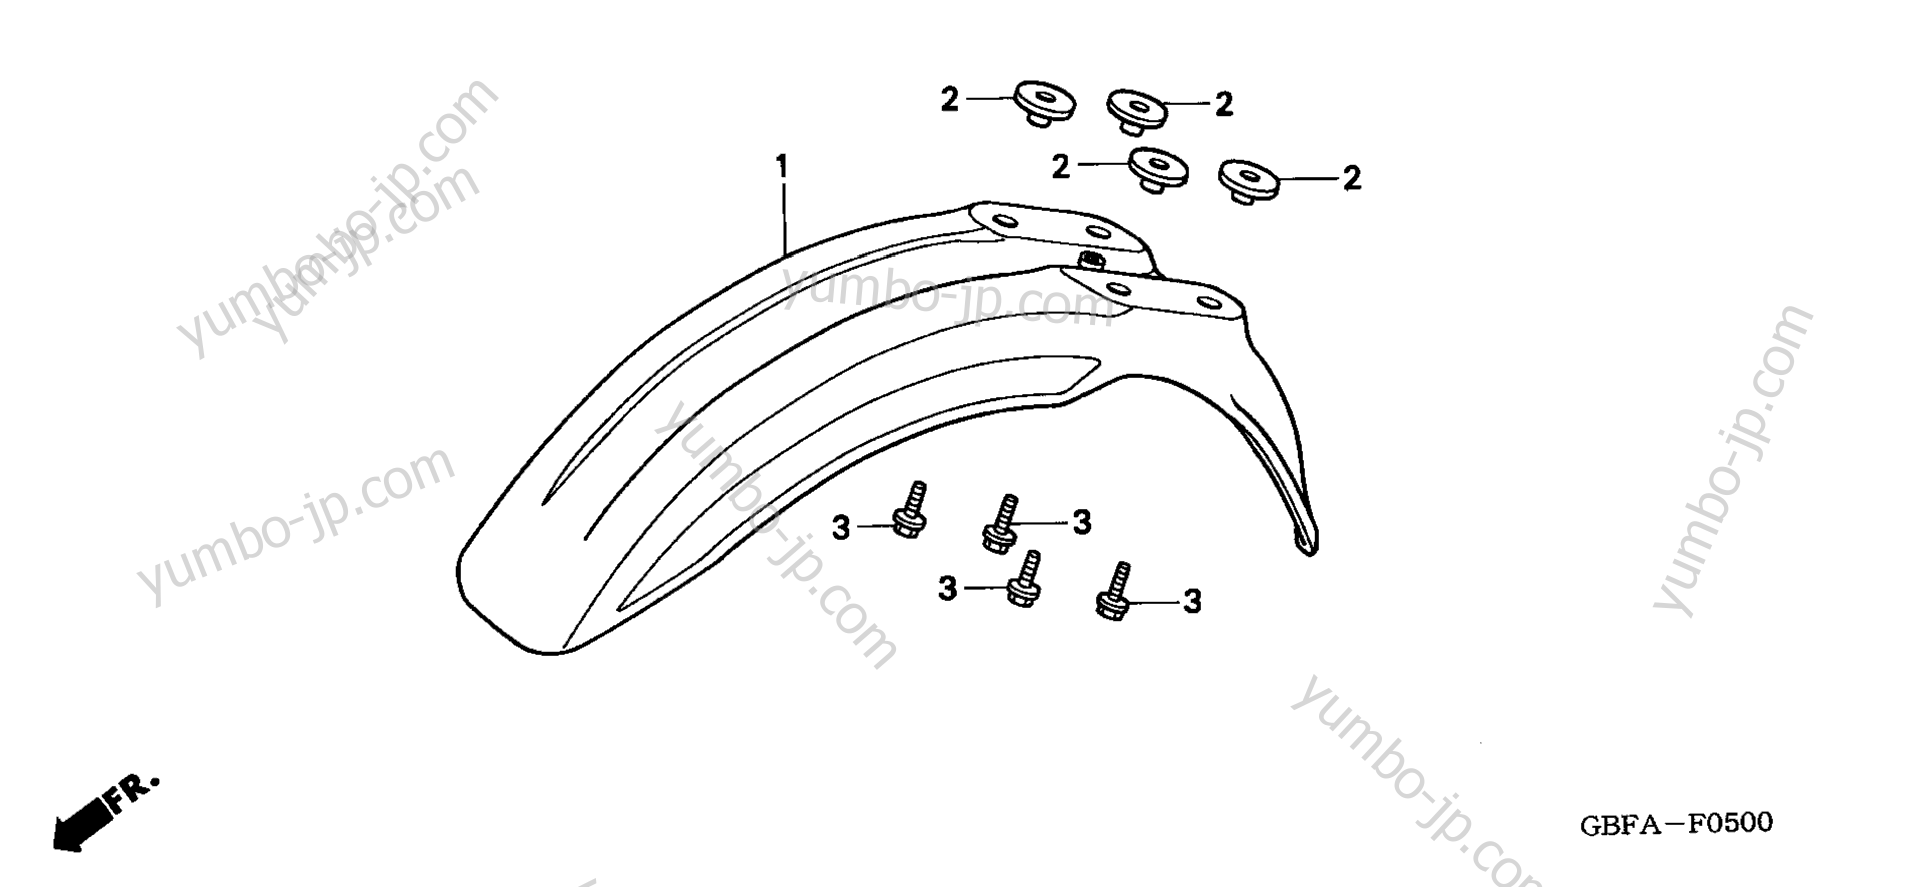 FRONT FENDER for motorcycles HONDA CR80RB A 2000 year